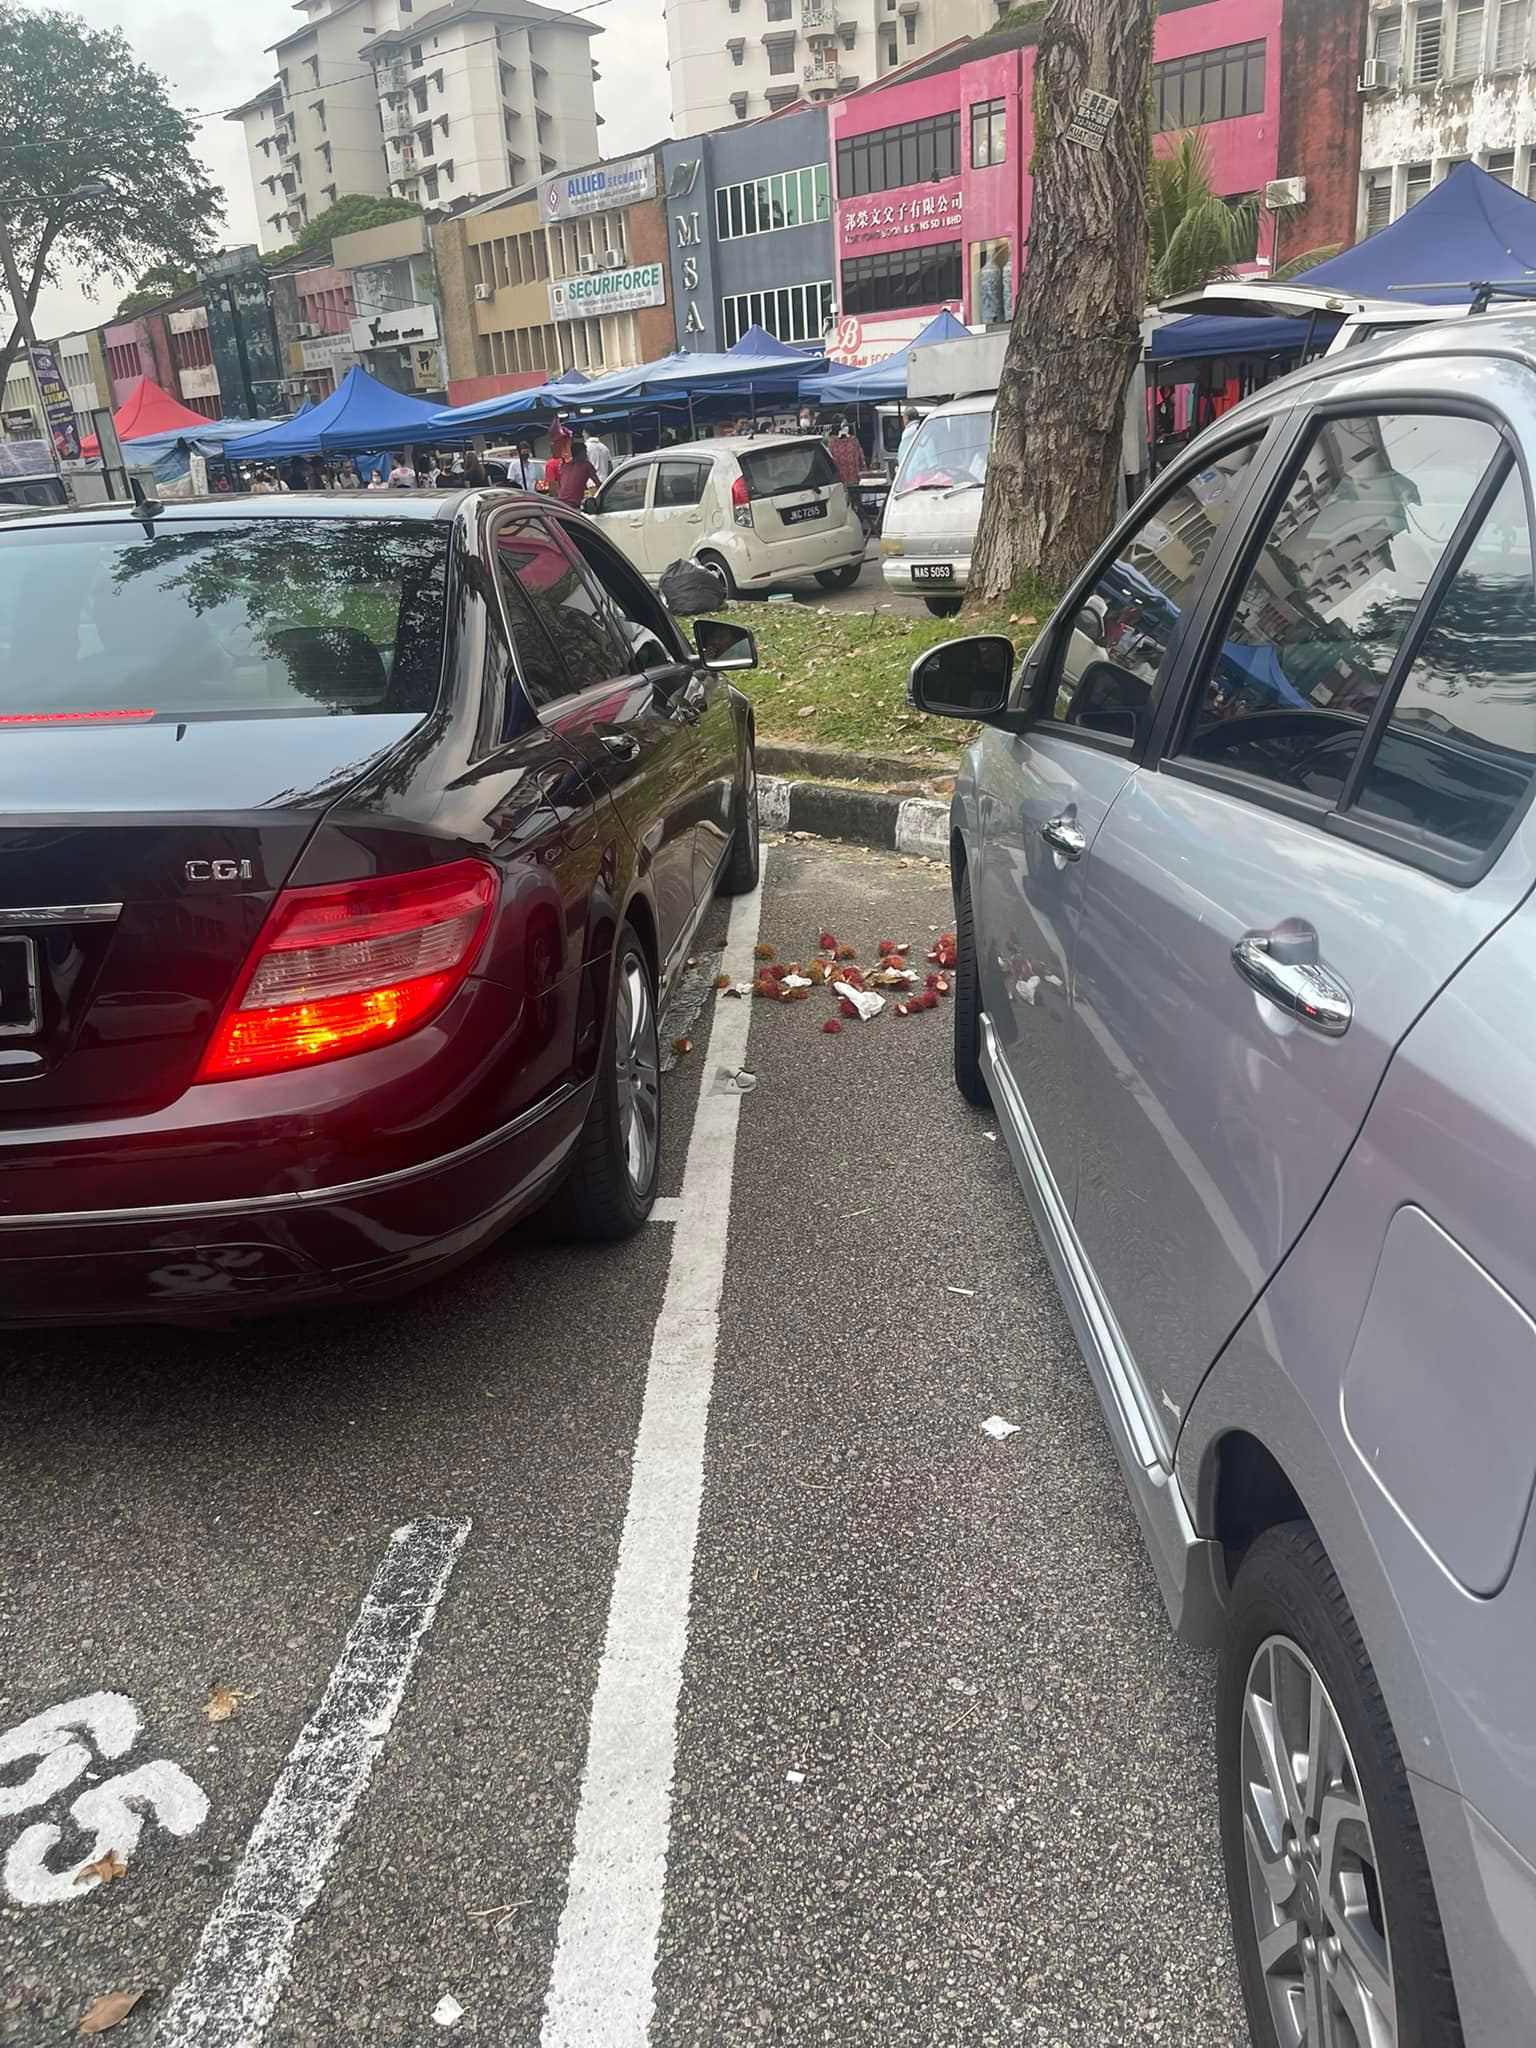 Sg-registered car spotted throwing rambutan husks by the roadside in jb 01